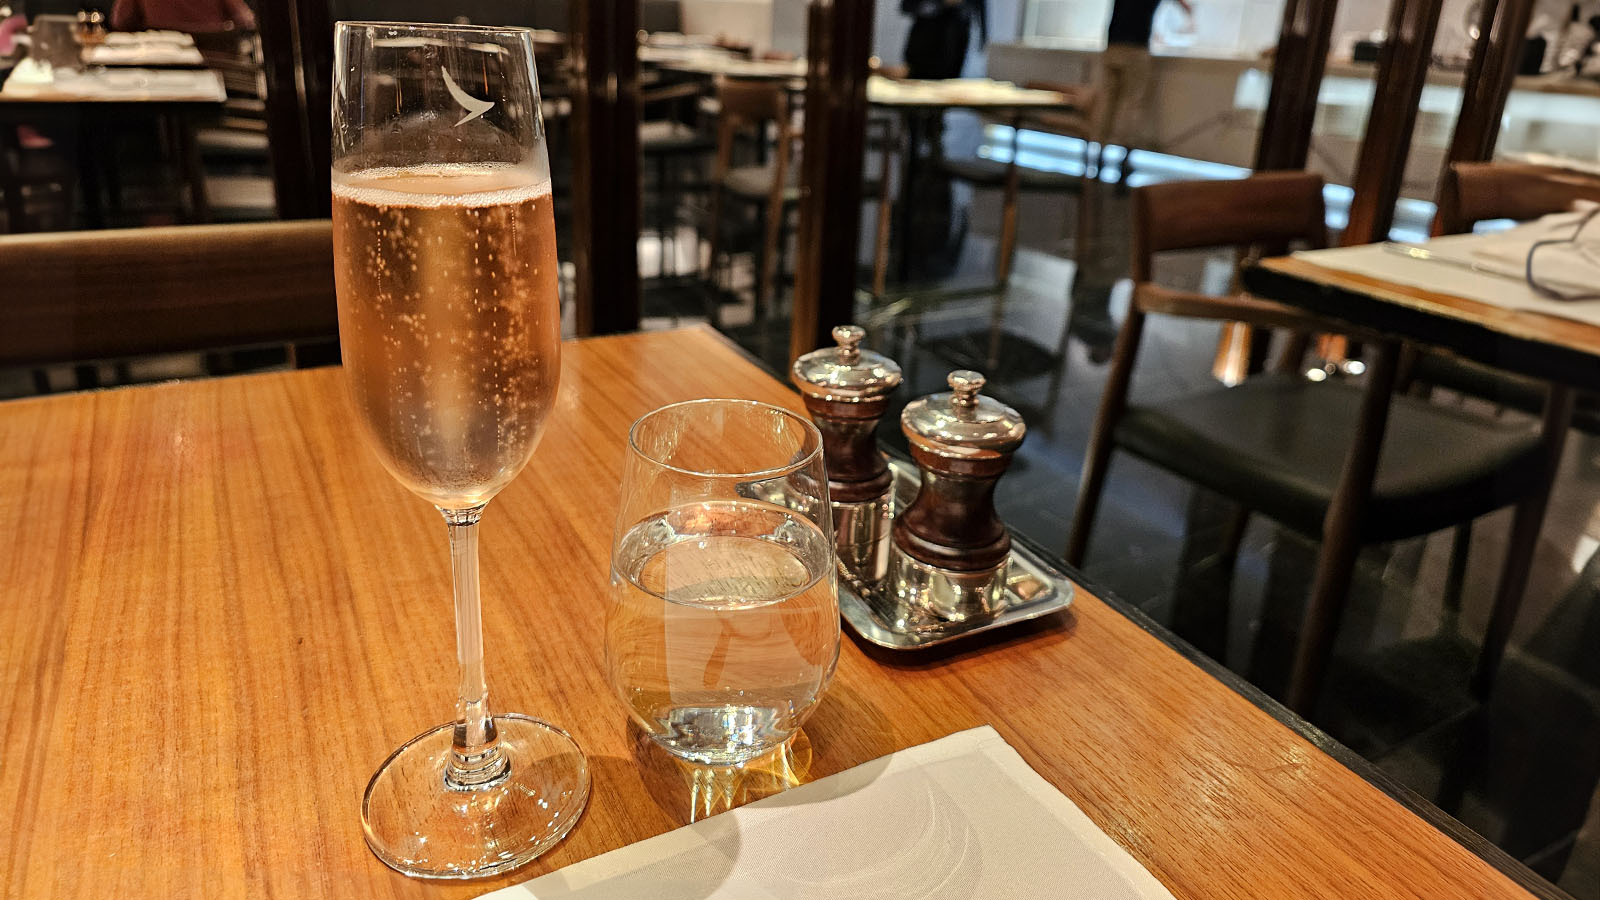 Bubbles in in Cathay Pacific's The Wing First Class